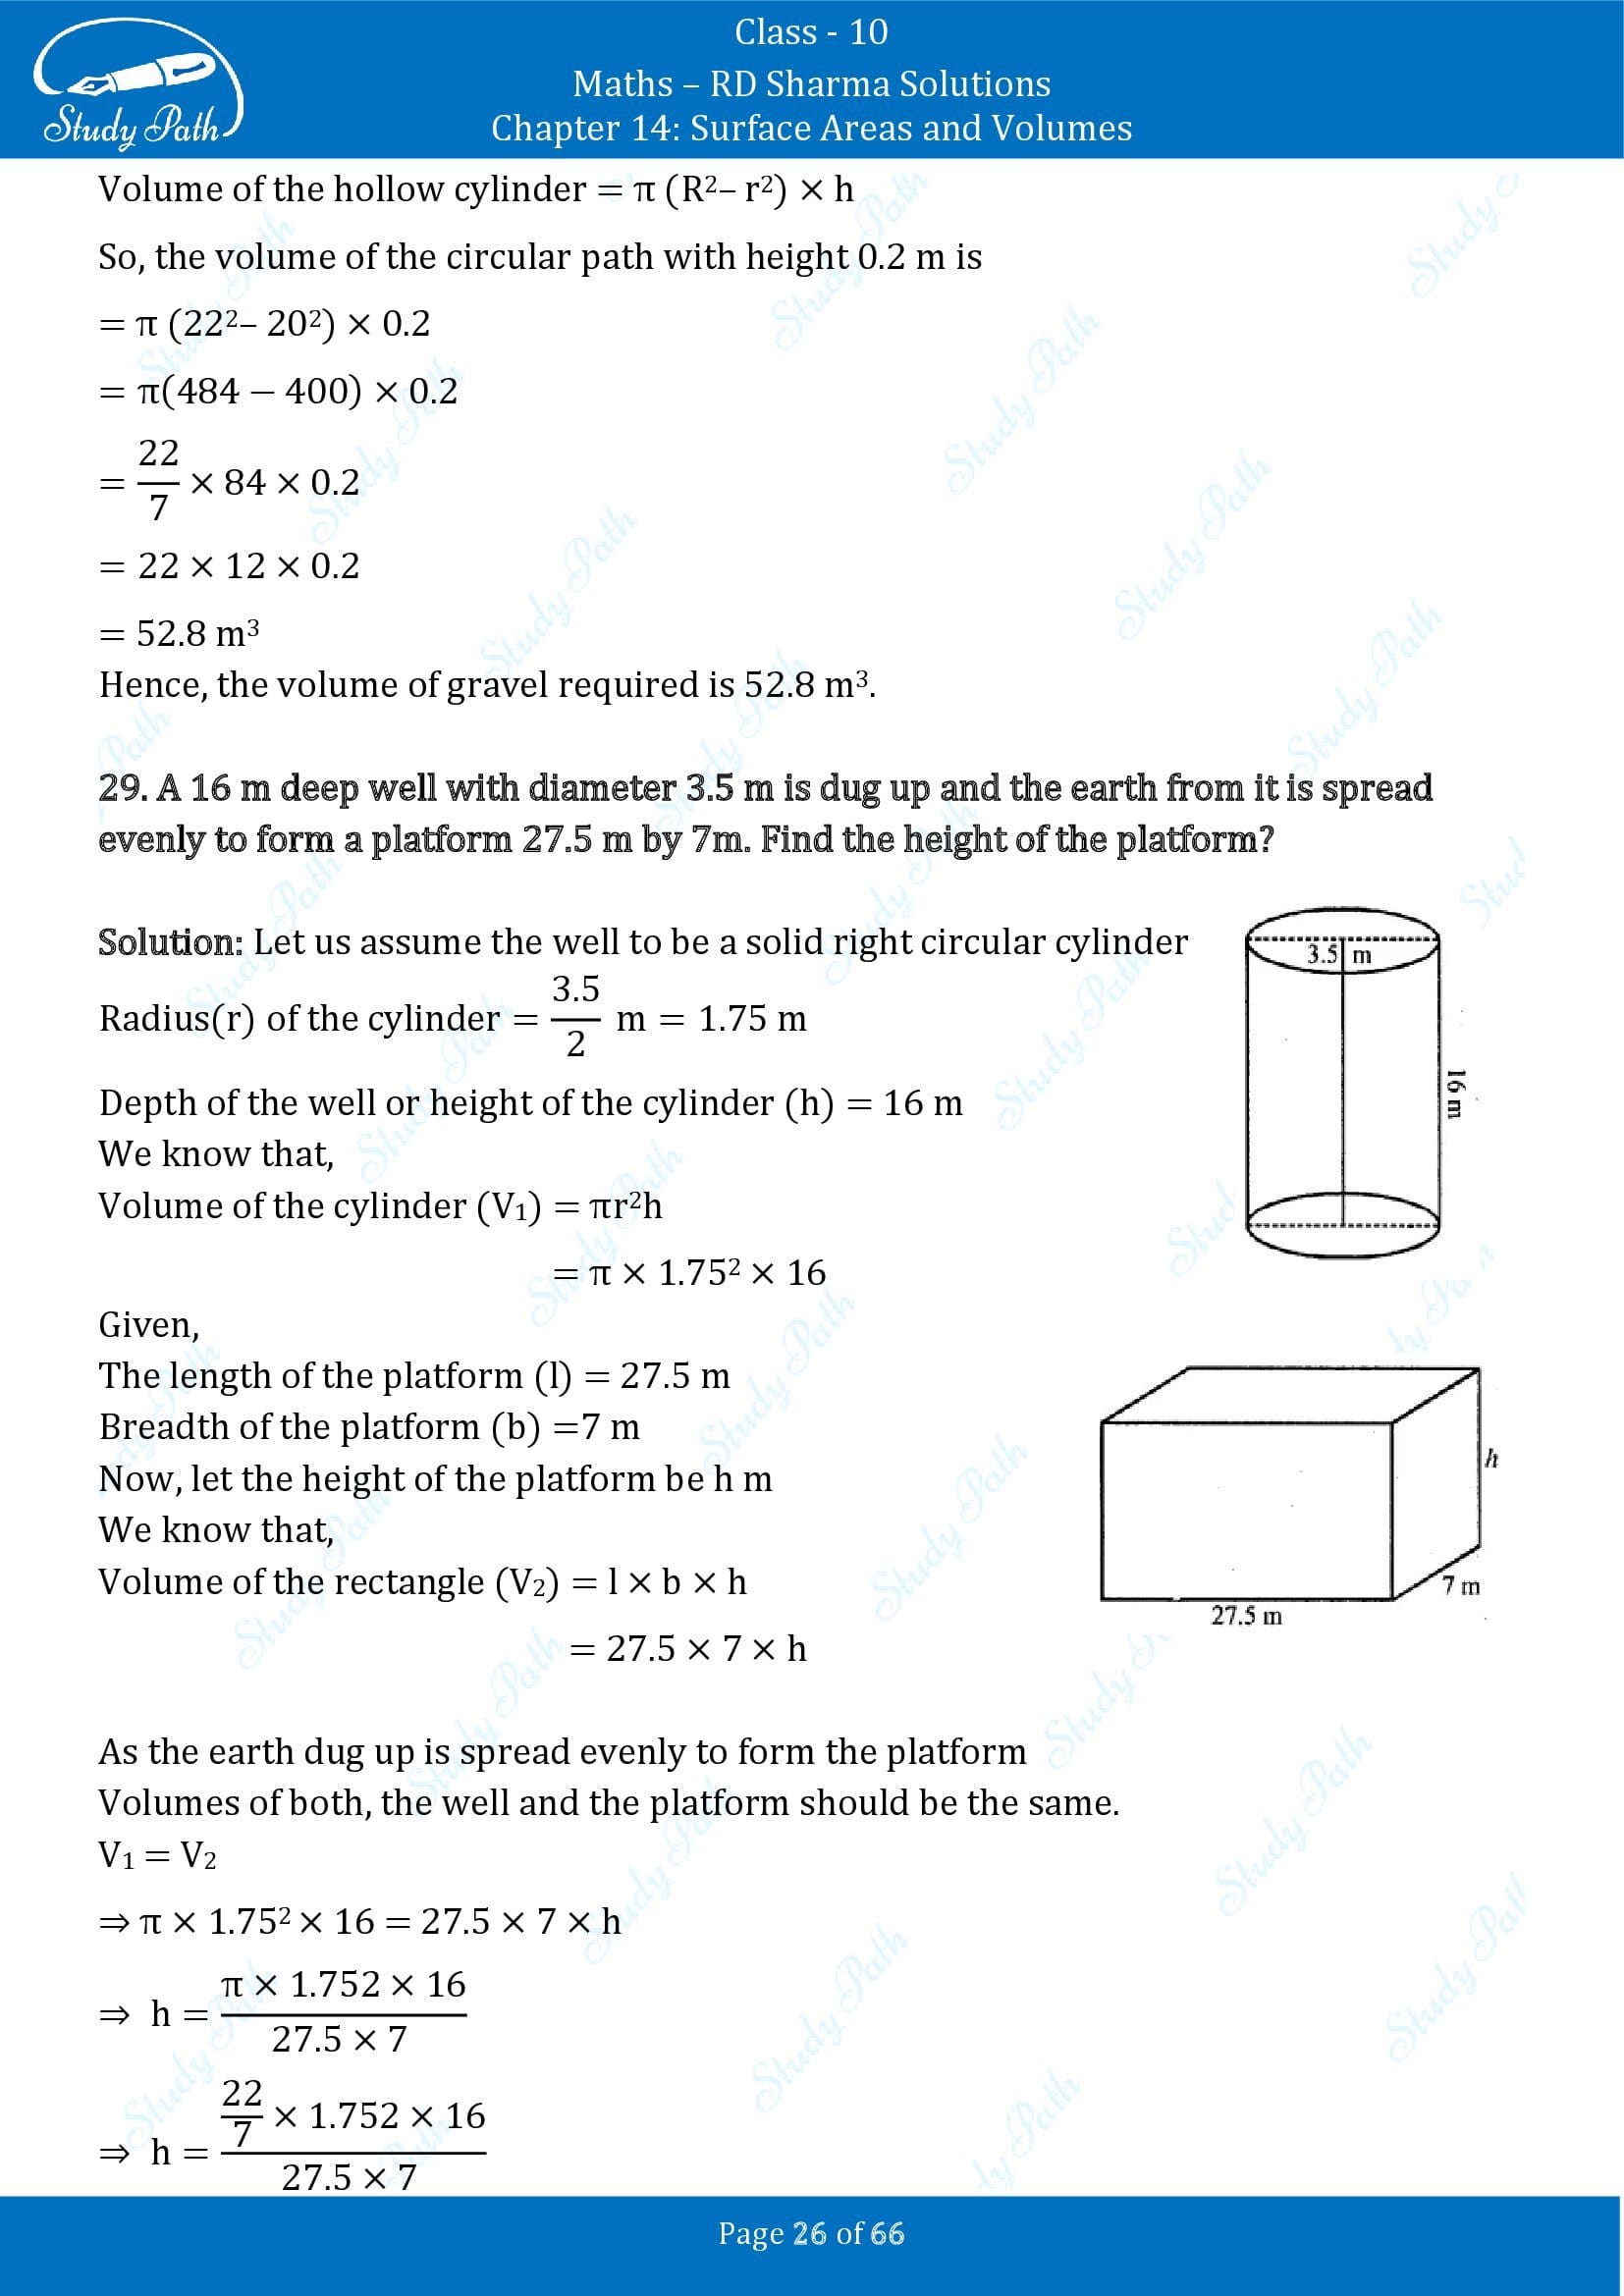 RD Sharma Solutions Class 10 Chapter 14 Surface Areas and Volumes Exercise 14.1 00026